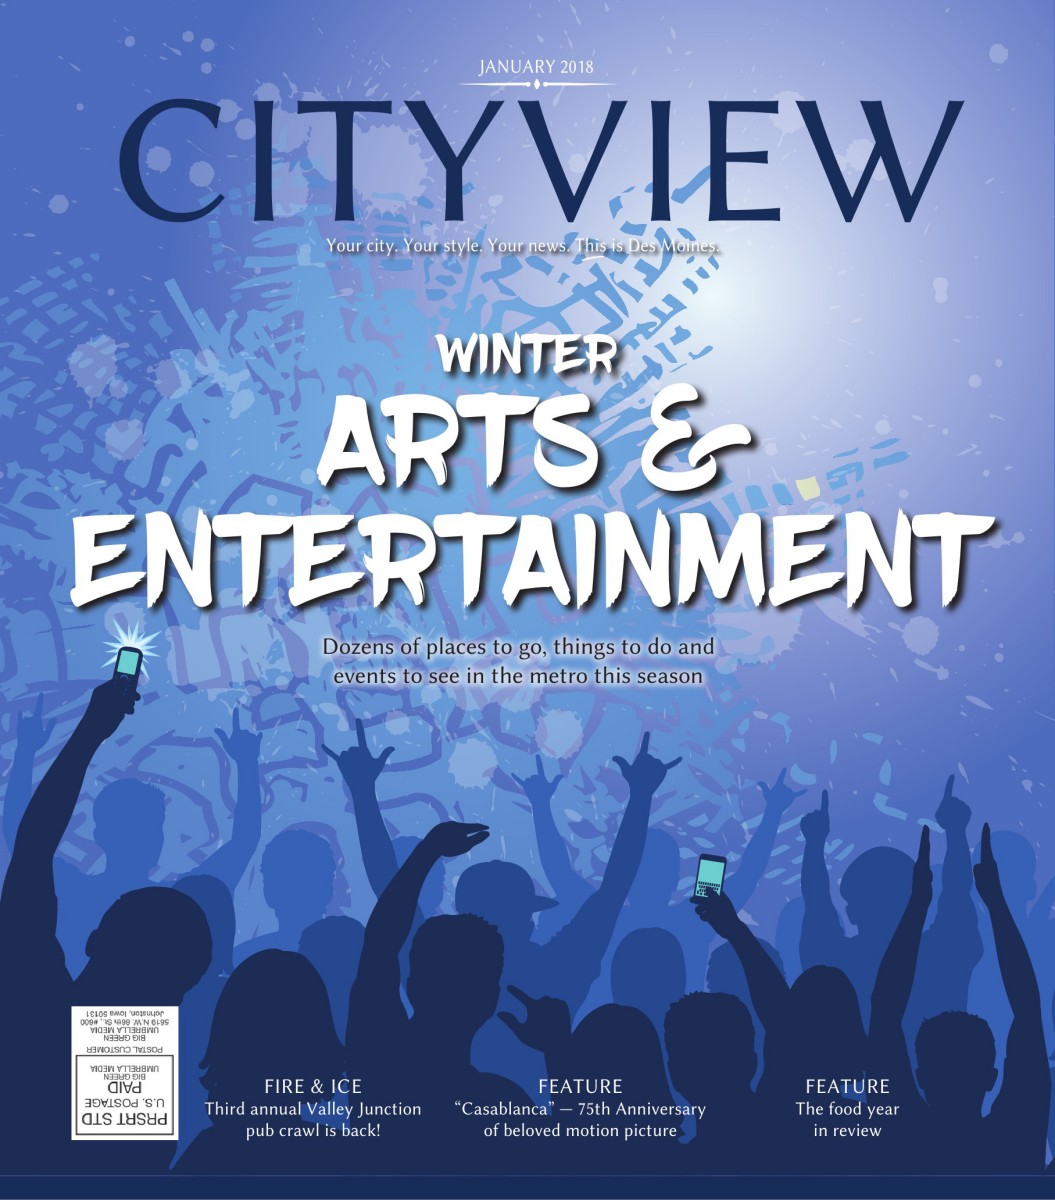 http://www.dmcityview.com/CityviewJanuary2018/files/pages/tablet/1.jpg